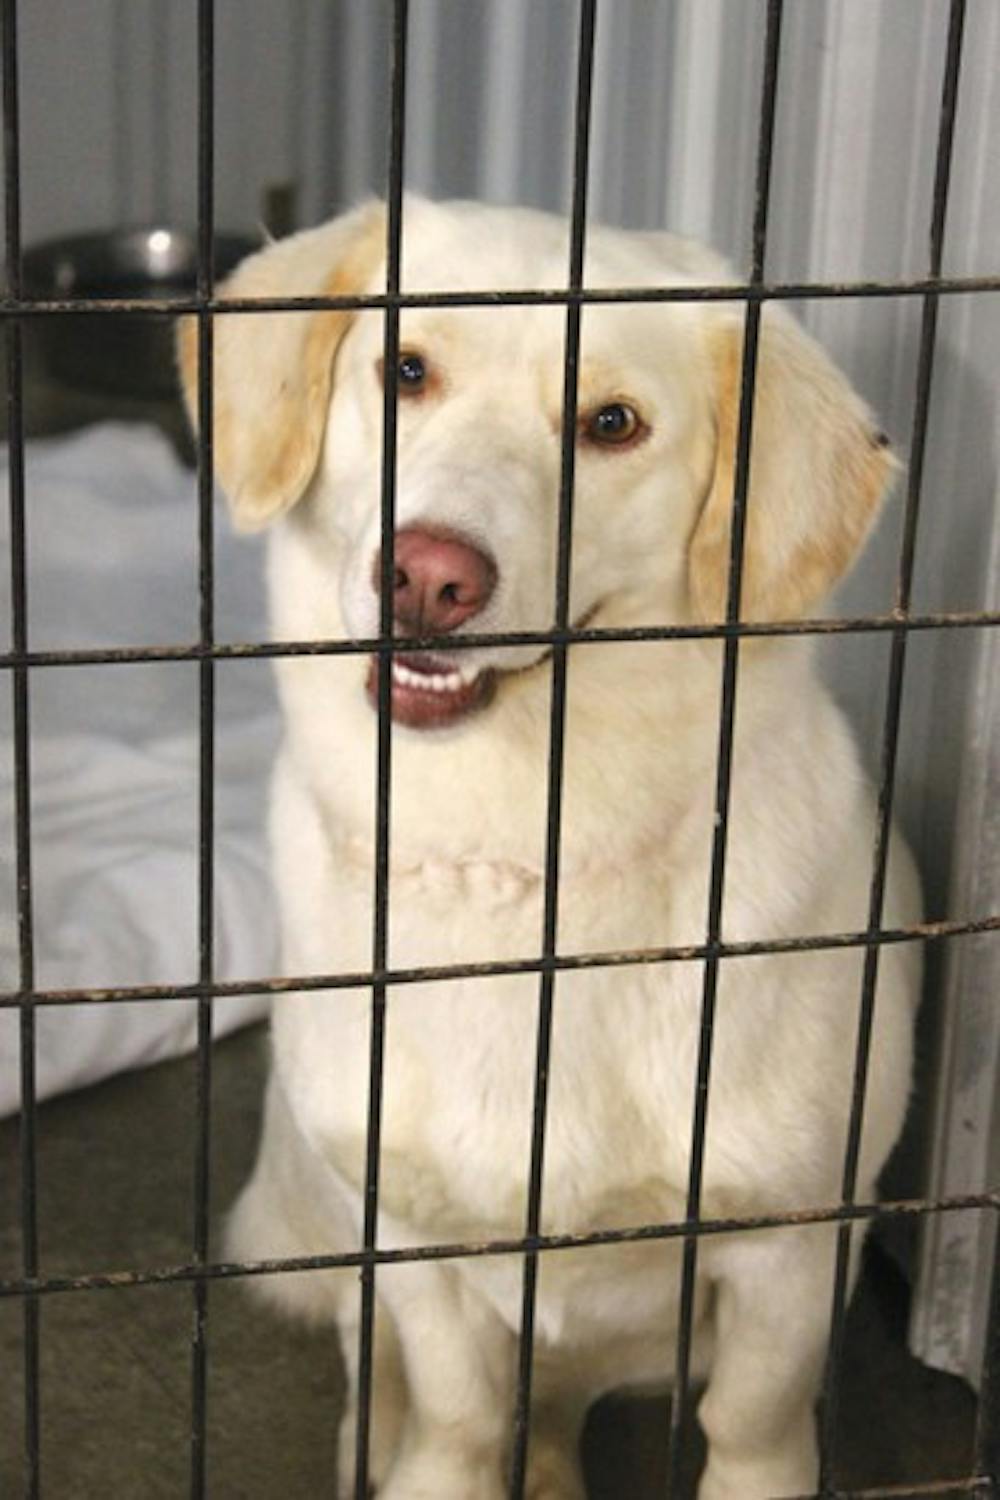 An adoptable dog at ARF smiles through the bars of its cage. ARF is a no-kill, animal rescue center that has been in the Muncie Community for over 15 years. DN PHOTO KRYSTAL BYERS